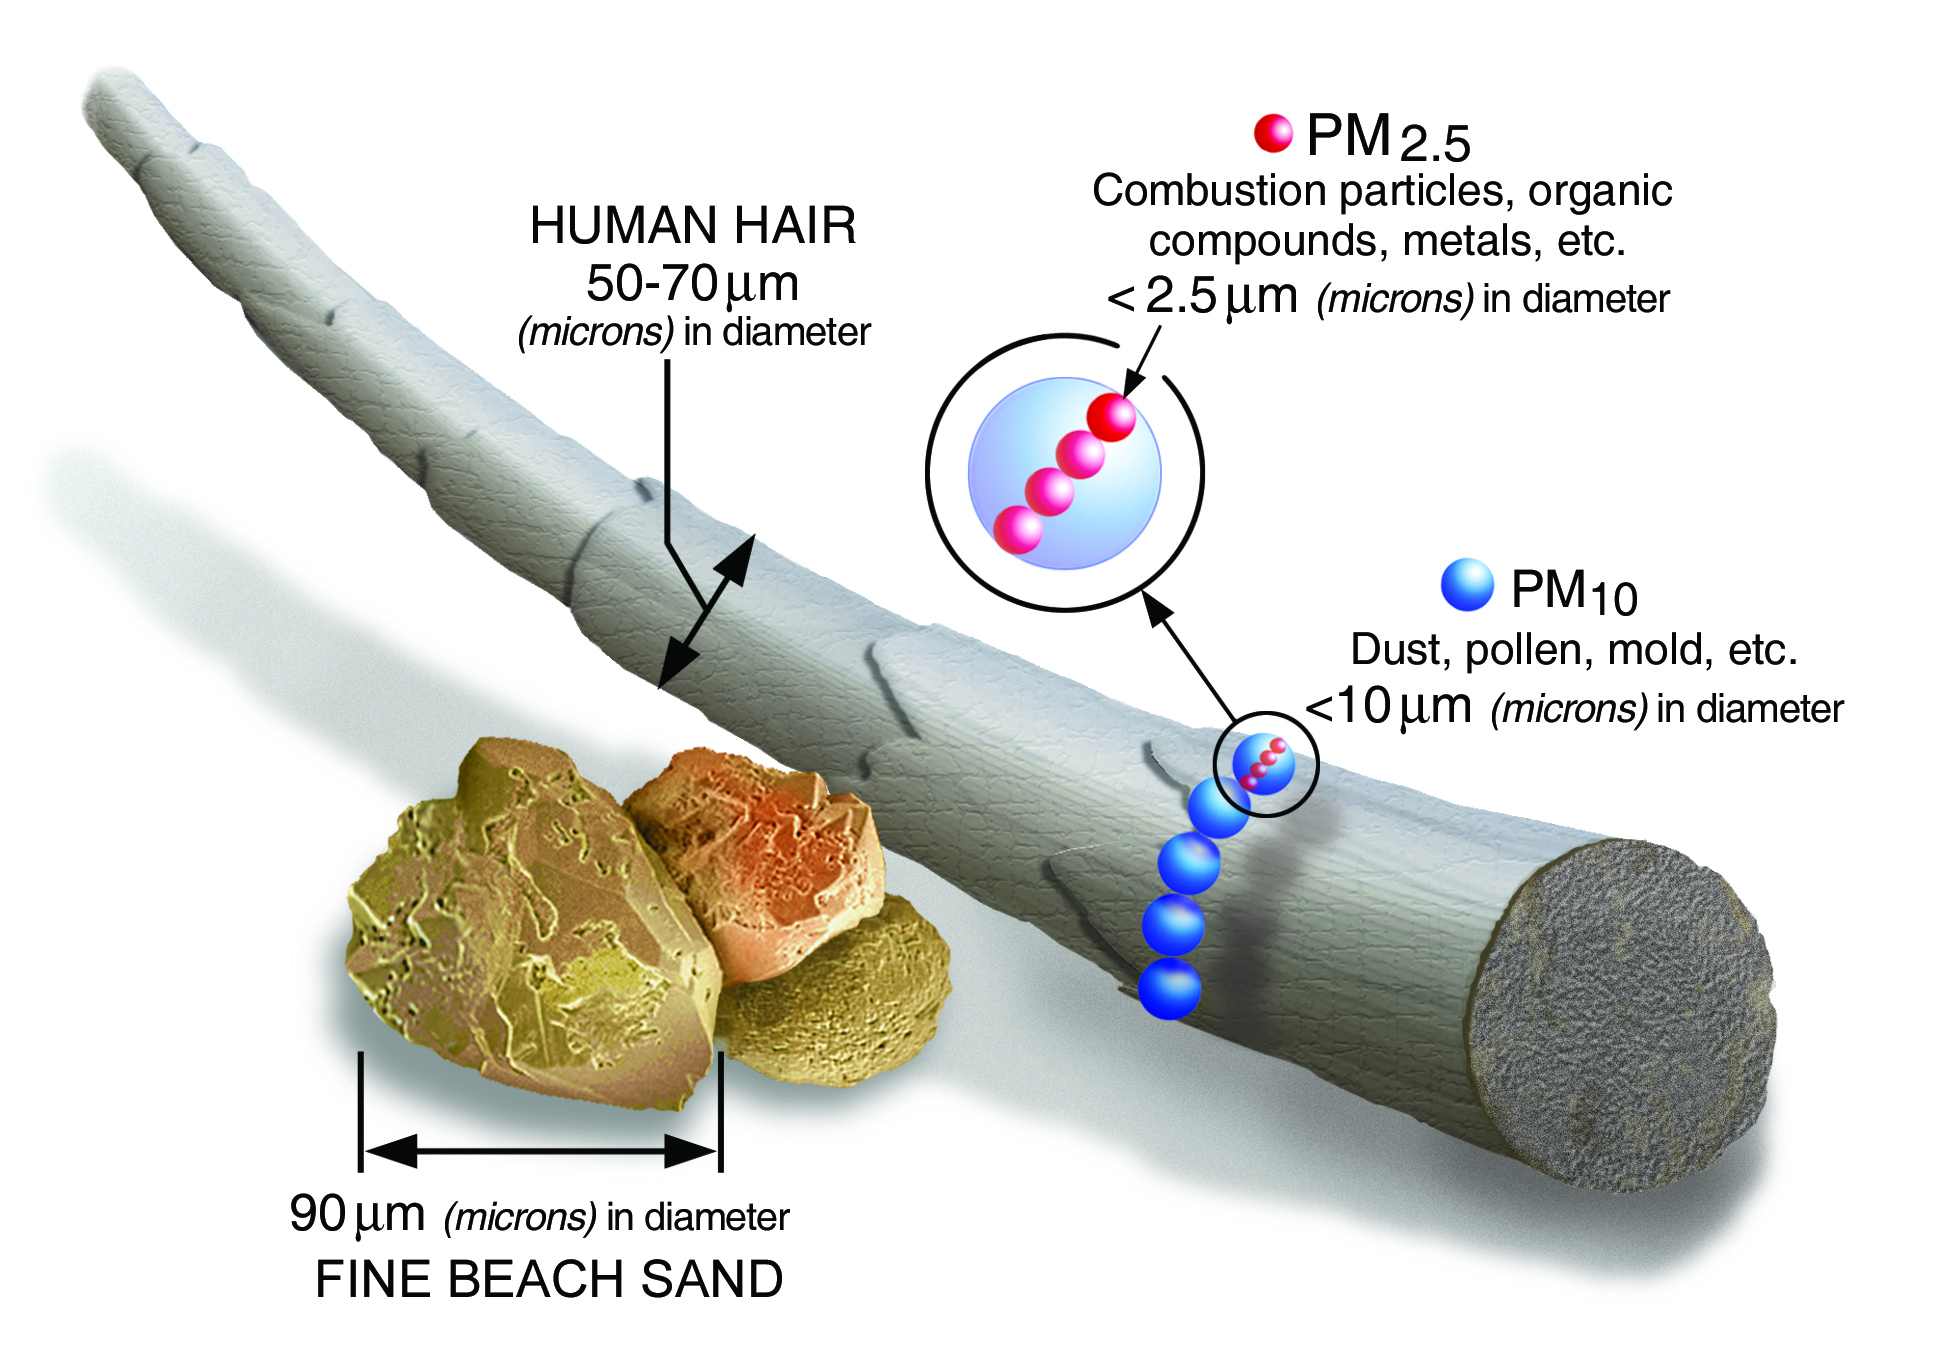 PM2.5 particles compared to fine beach sand, human hair and PM10 